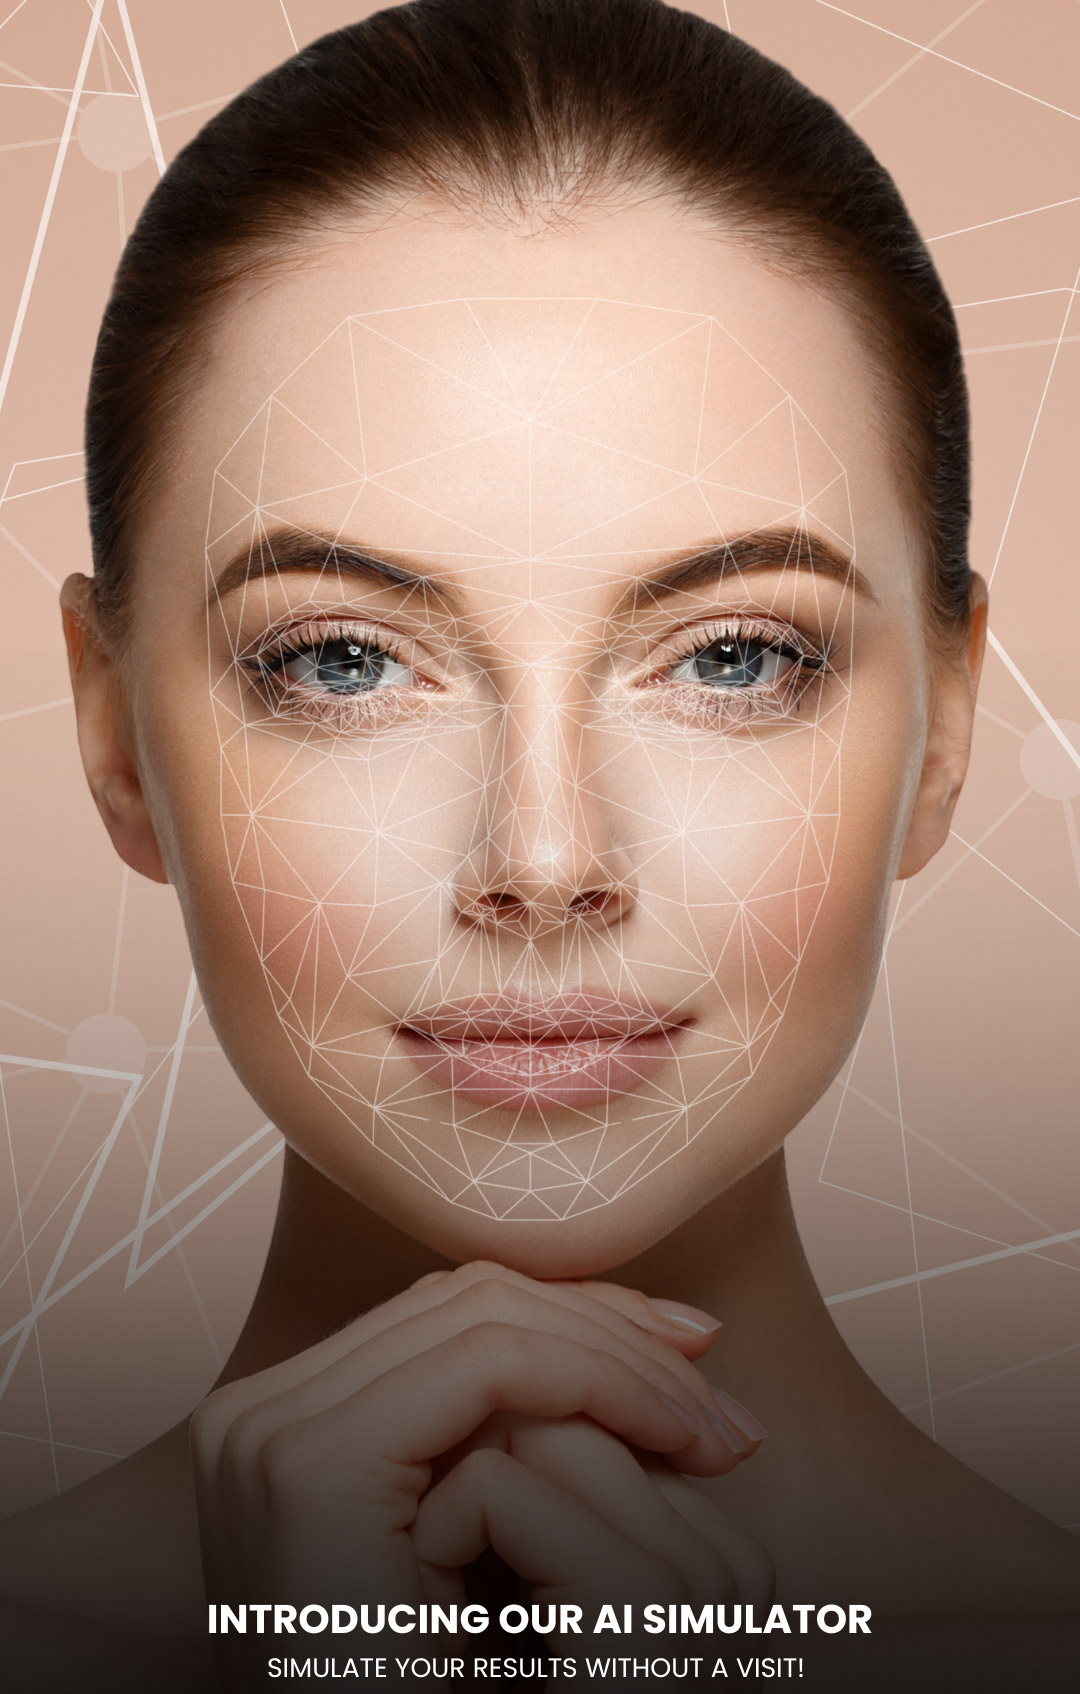 Introducing our AI simulator for fillers